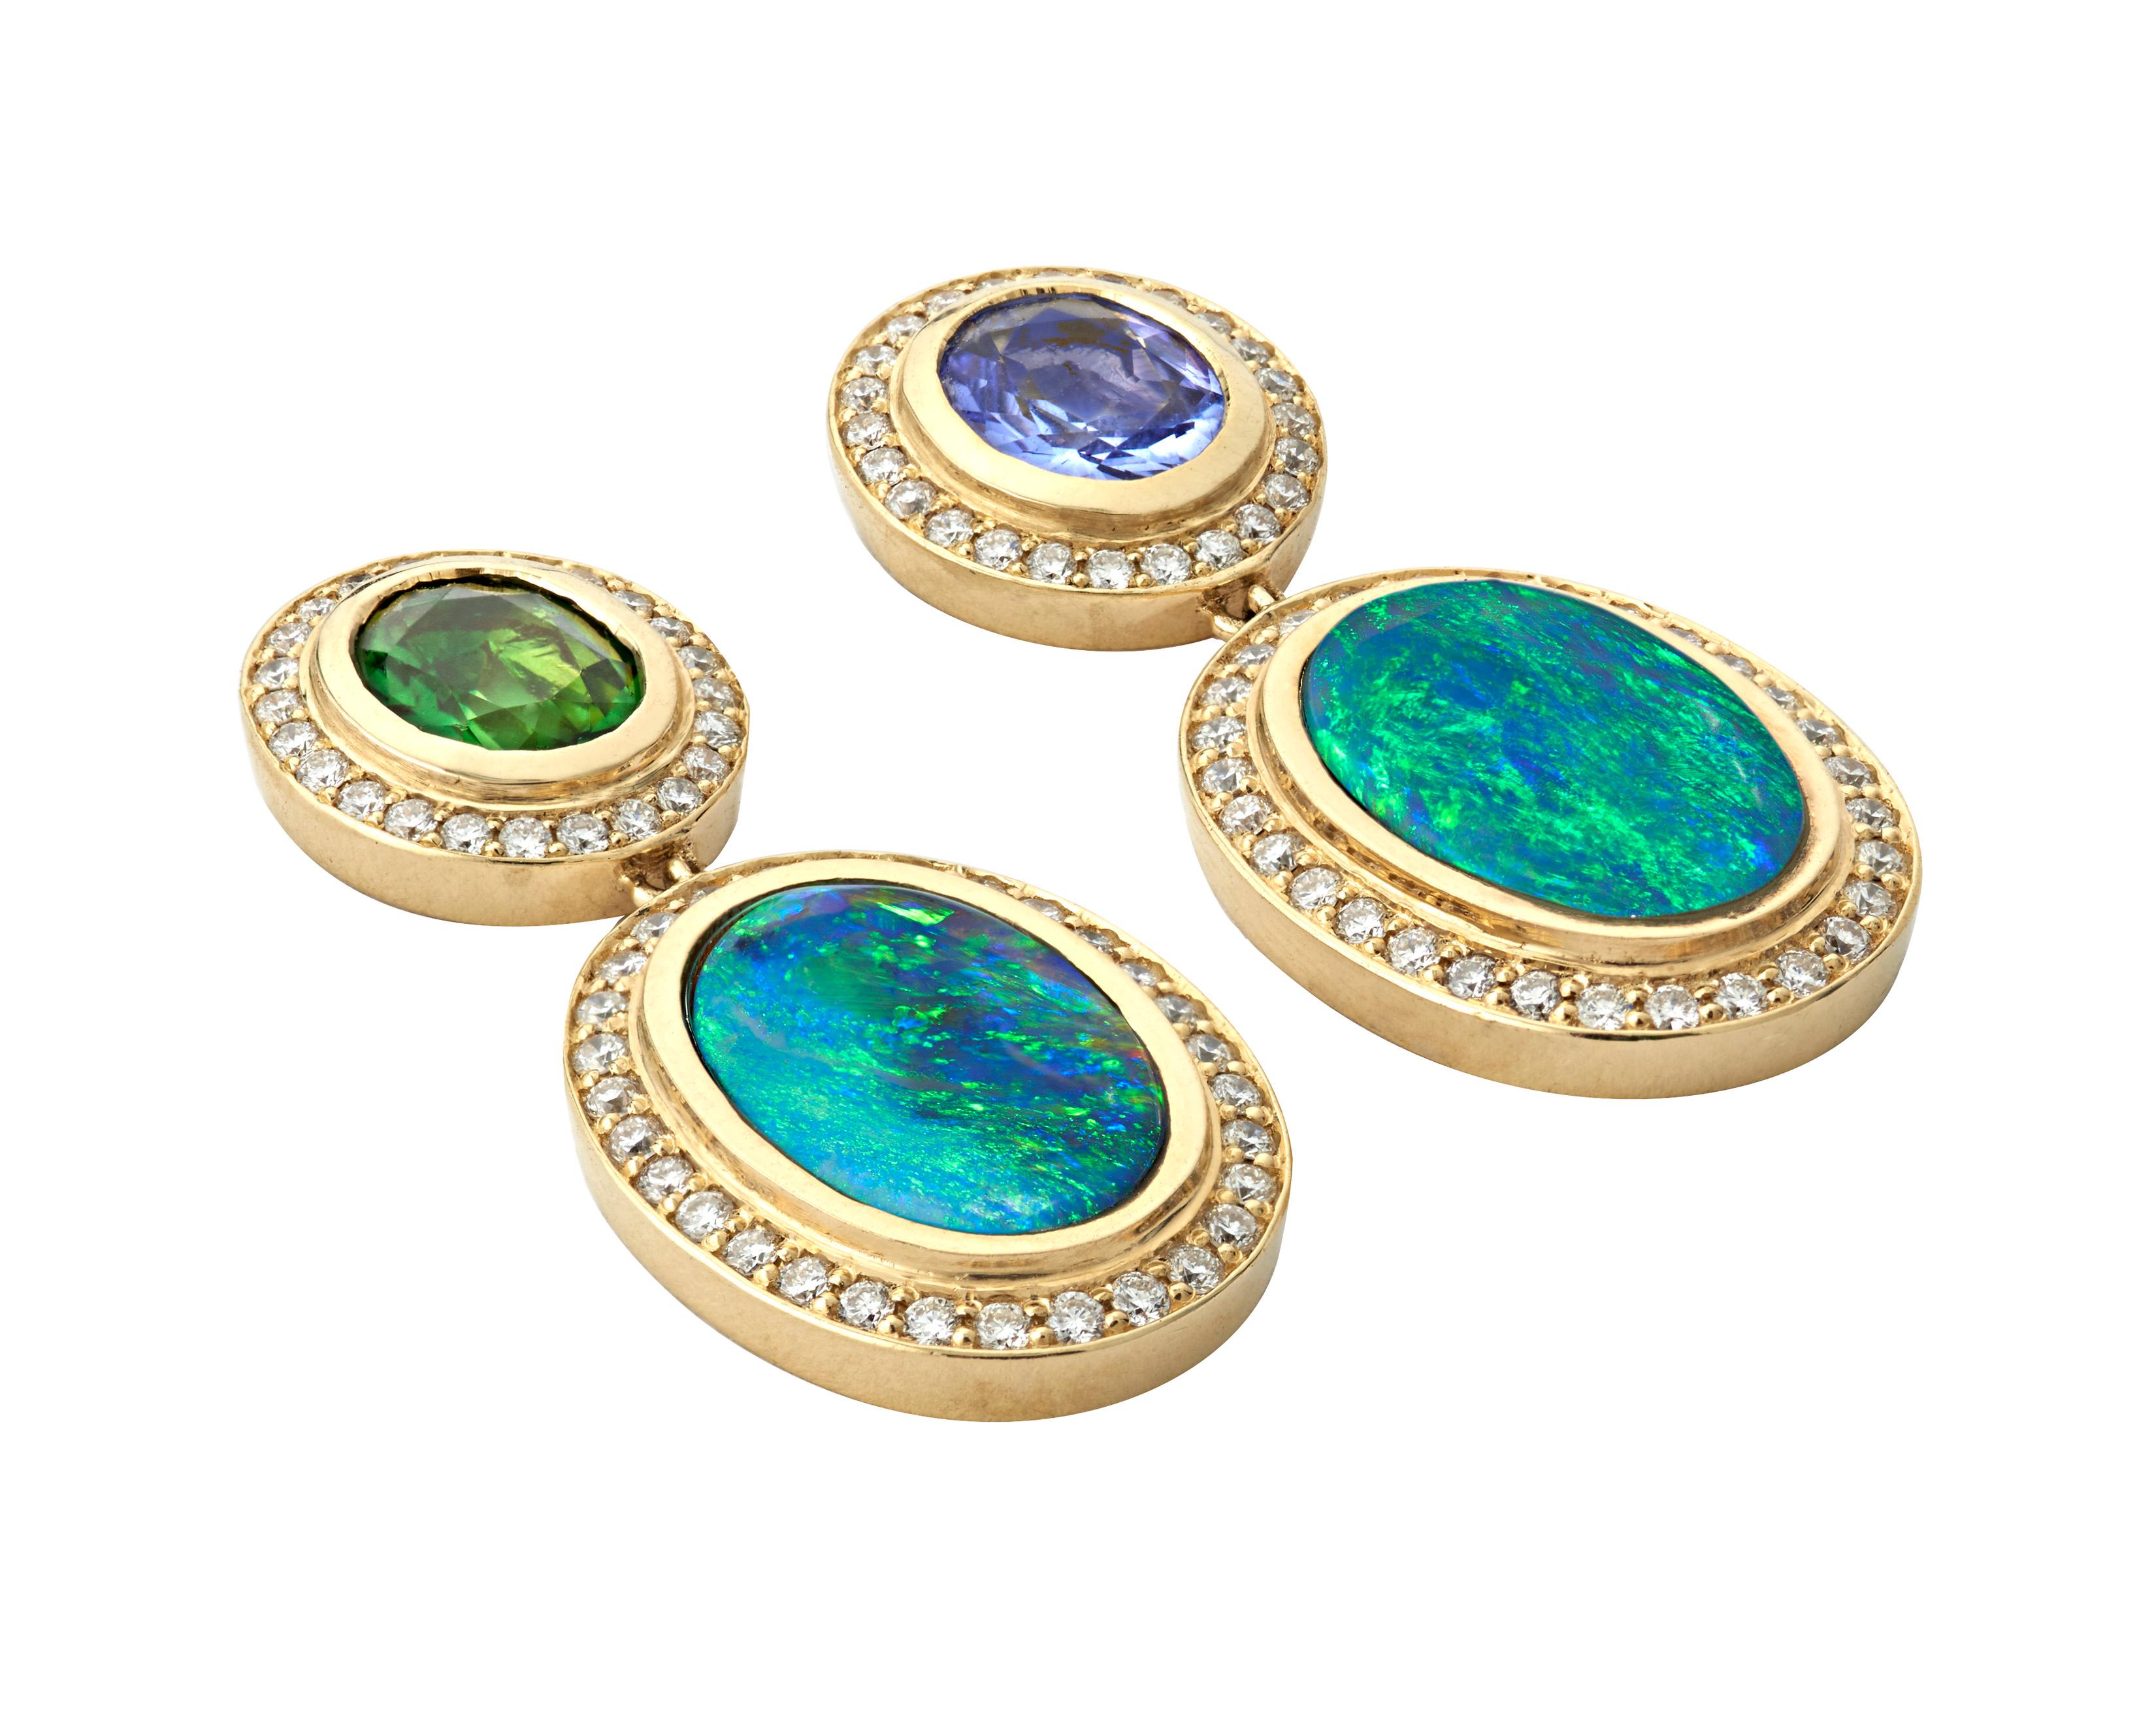 These award winning, 18k yellow gold drop earrings featuring two deep aqua black opal cabochons. One post showcasing a faceted oval Tanzanite gemstone and the other post sporting a beautiful oval Tsavorite gemstone.  This modern design using a